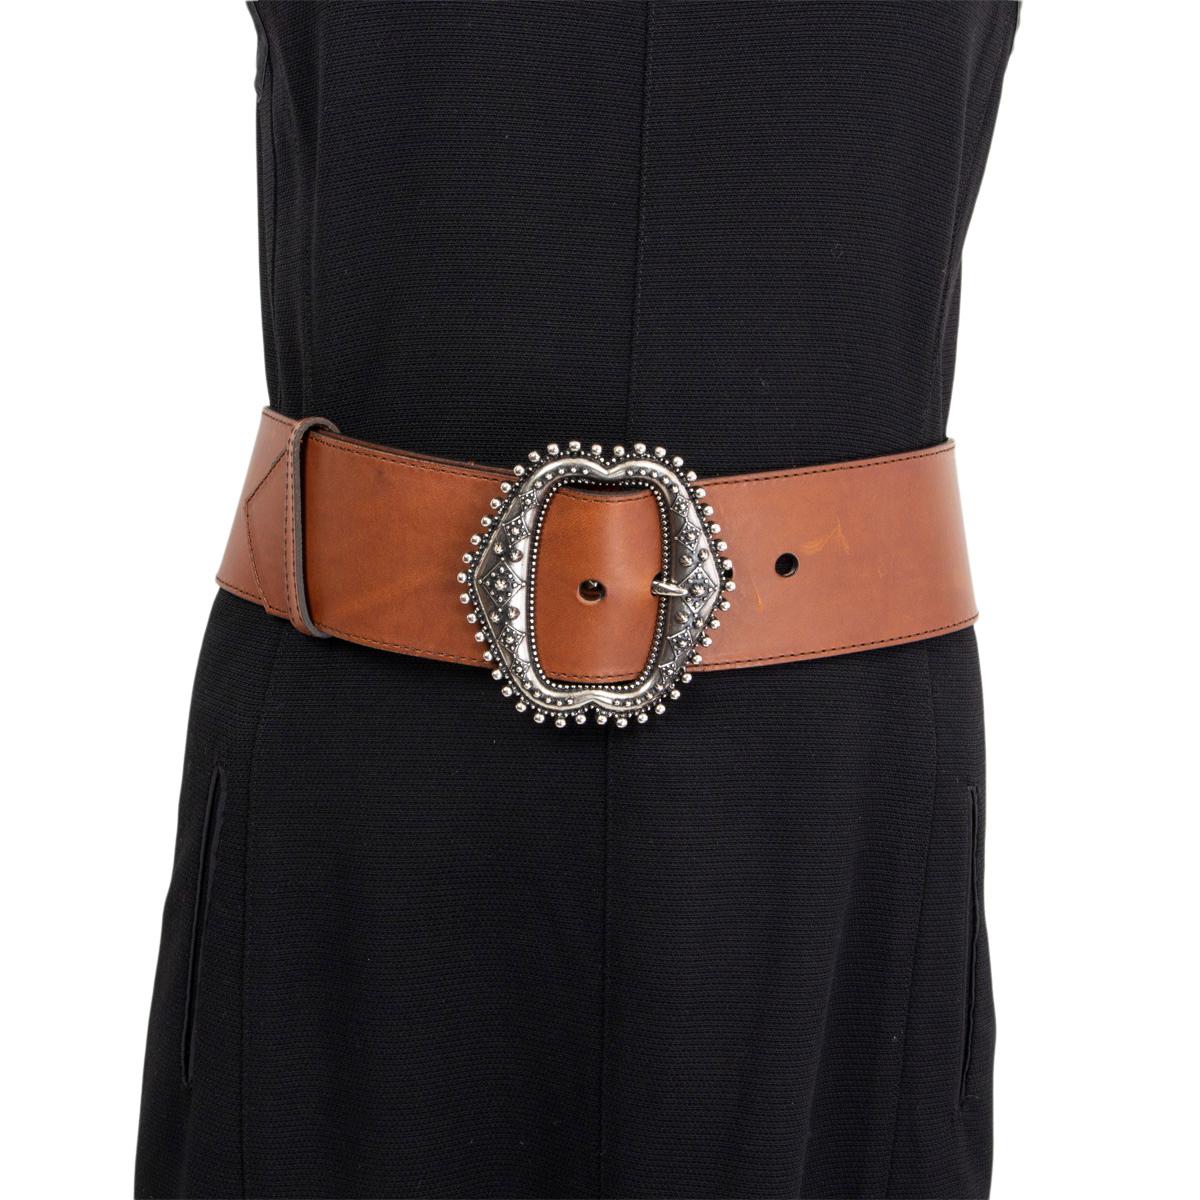 100% authentic Etro western style waist belt in brown calfskin and a buckle that's burnished in antique silver-tone metal for a vintage look and feel. Has been worn and shows some soft dents to the leather. Overall in very good condition.